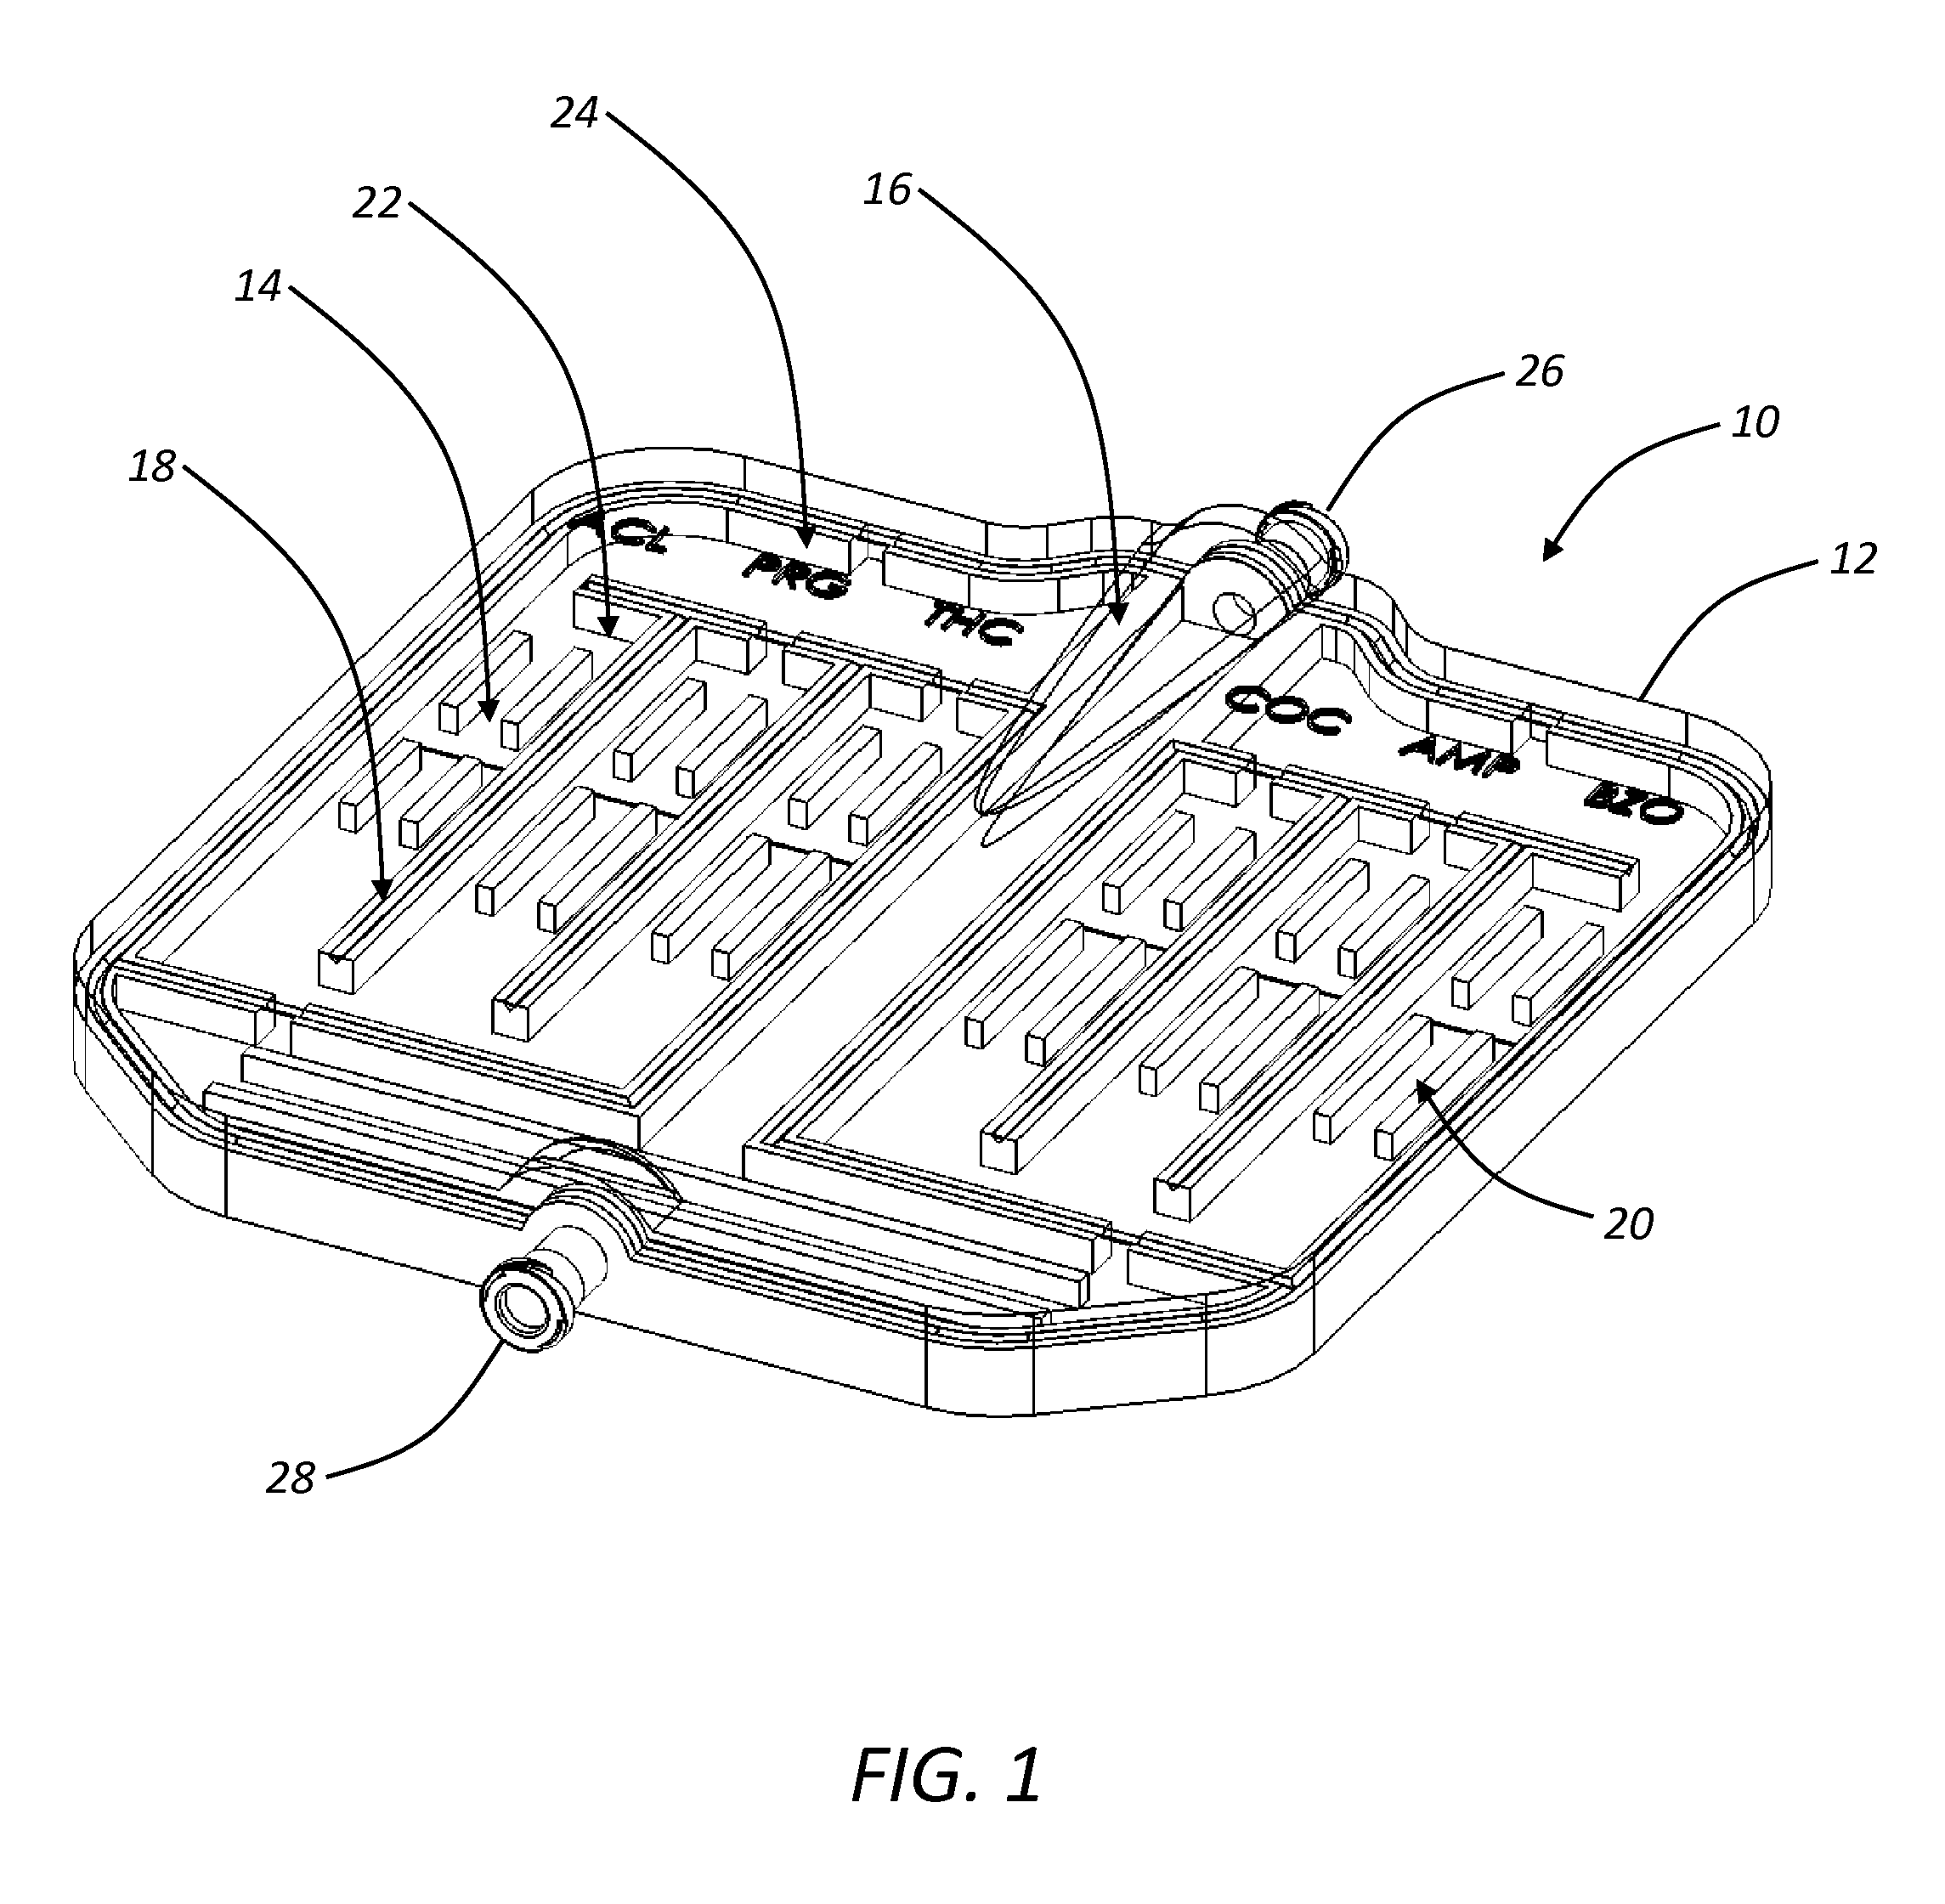 Urine test device incorporating urinary catheter or urinary bag attachment device and associated method of use